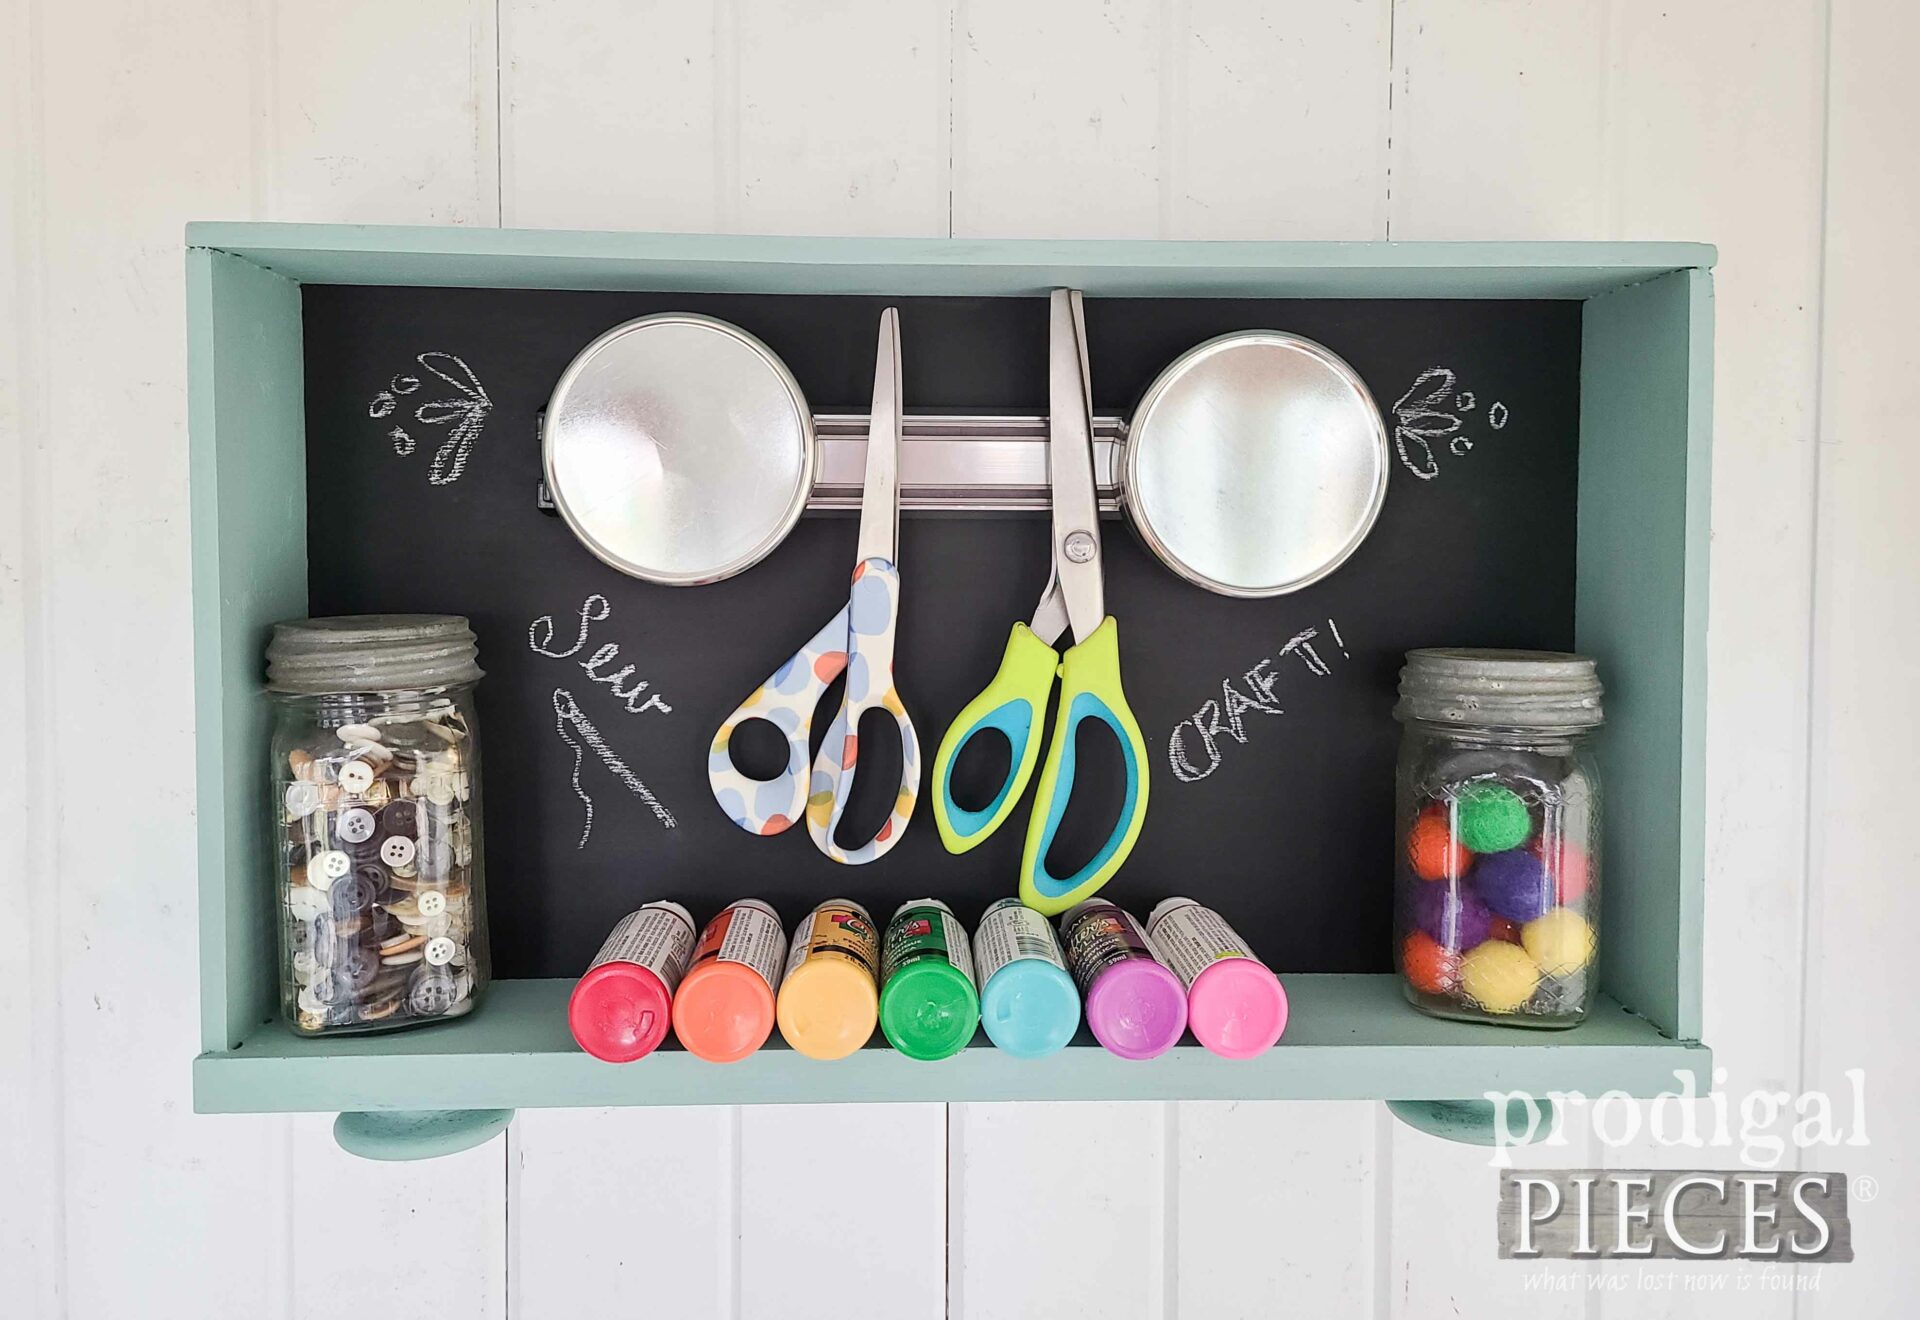 Upcycled Vanity Drawer with Magnetic Holder by Larissa of Prodigal Pieces | prodigalpieces.com #prodigalpieces #upcycled #diy #home